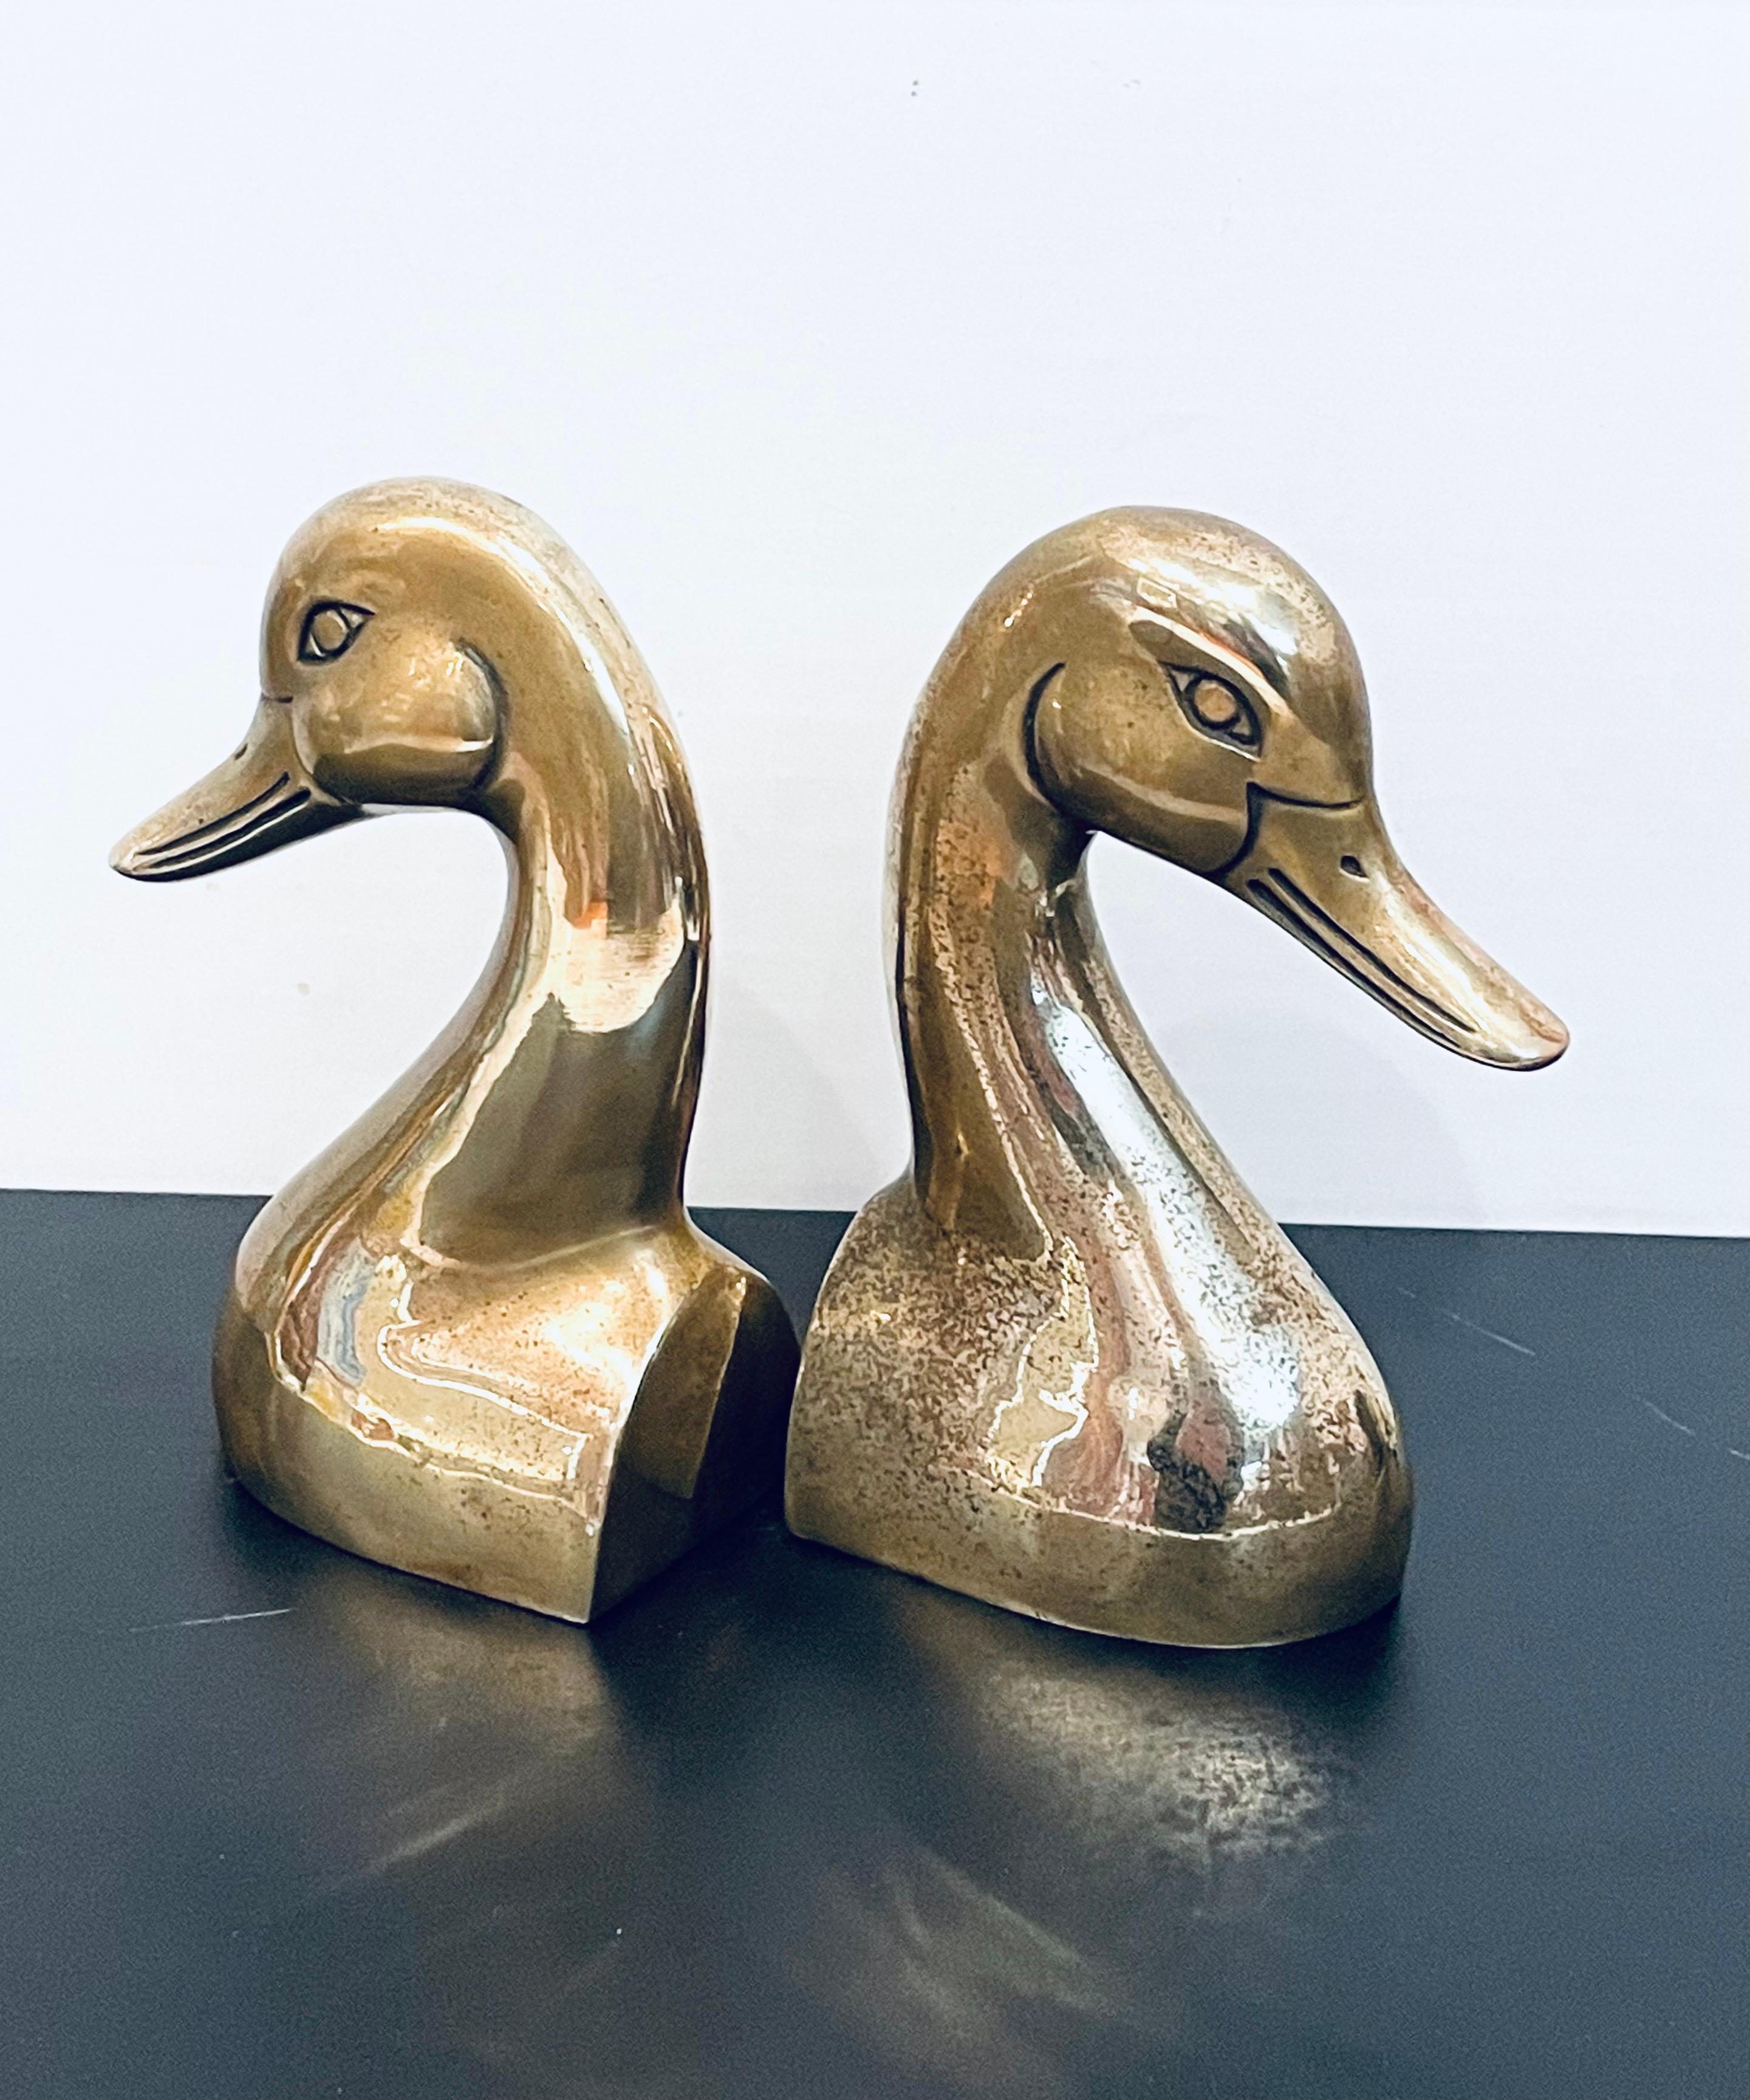 Nicely light polished brass bookends, duck heads, circa 1970s.